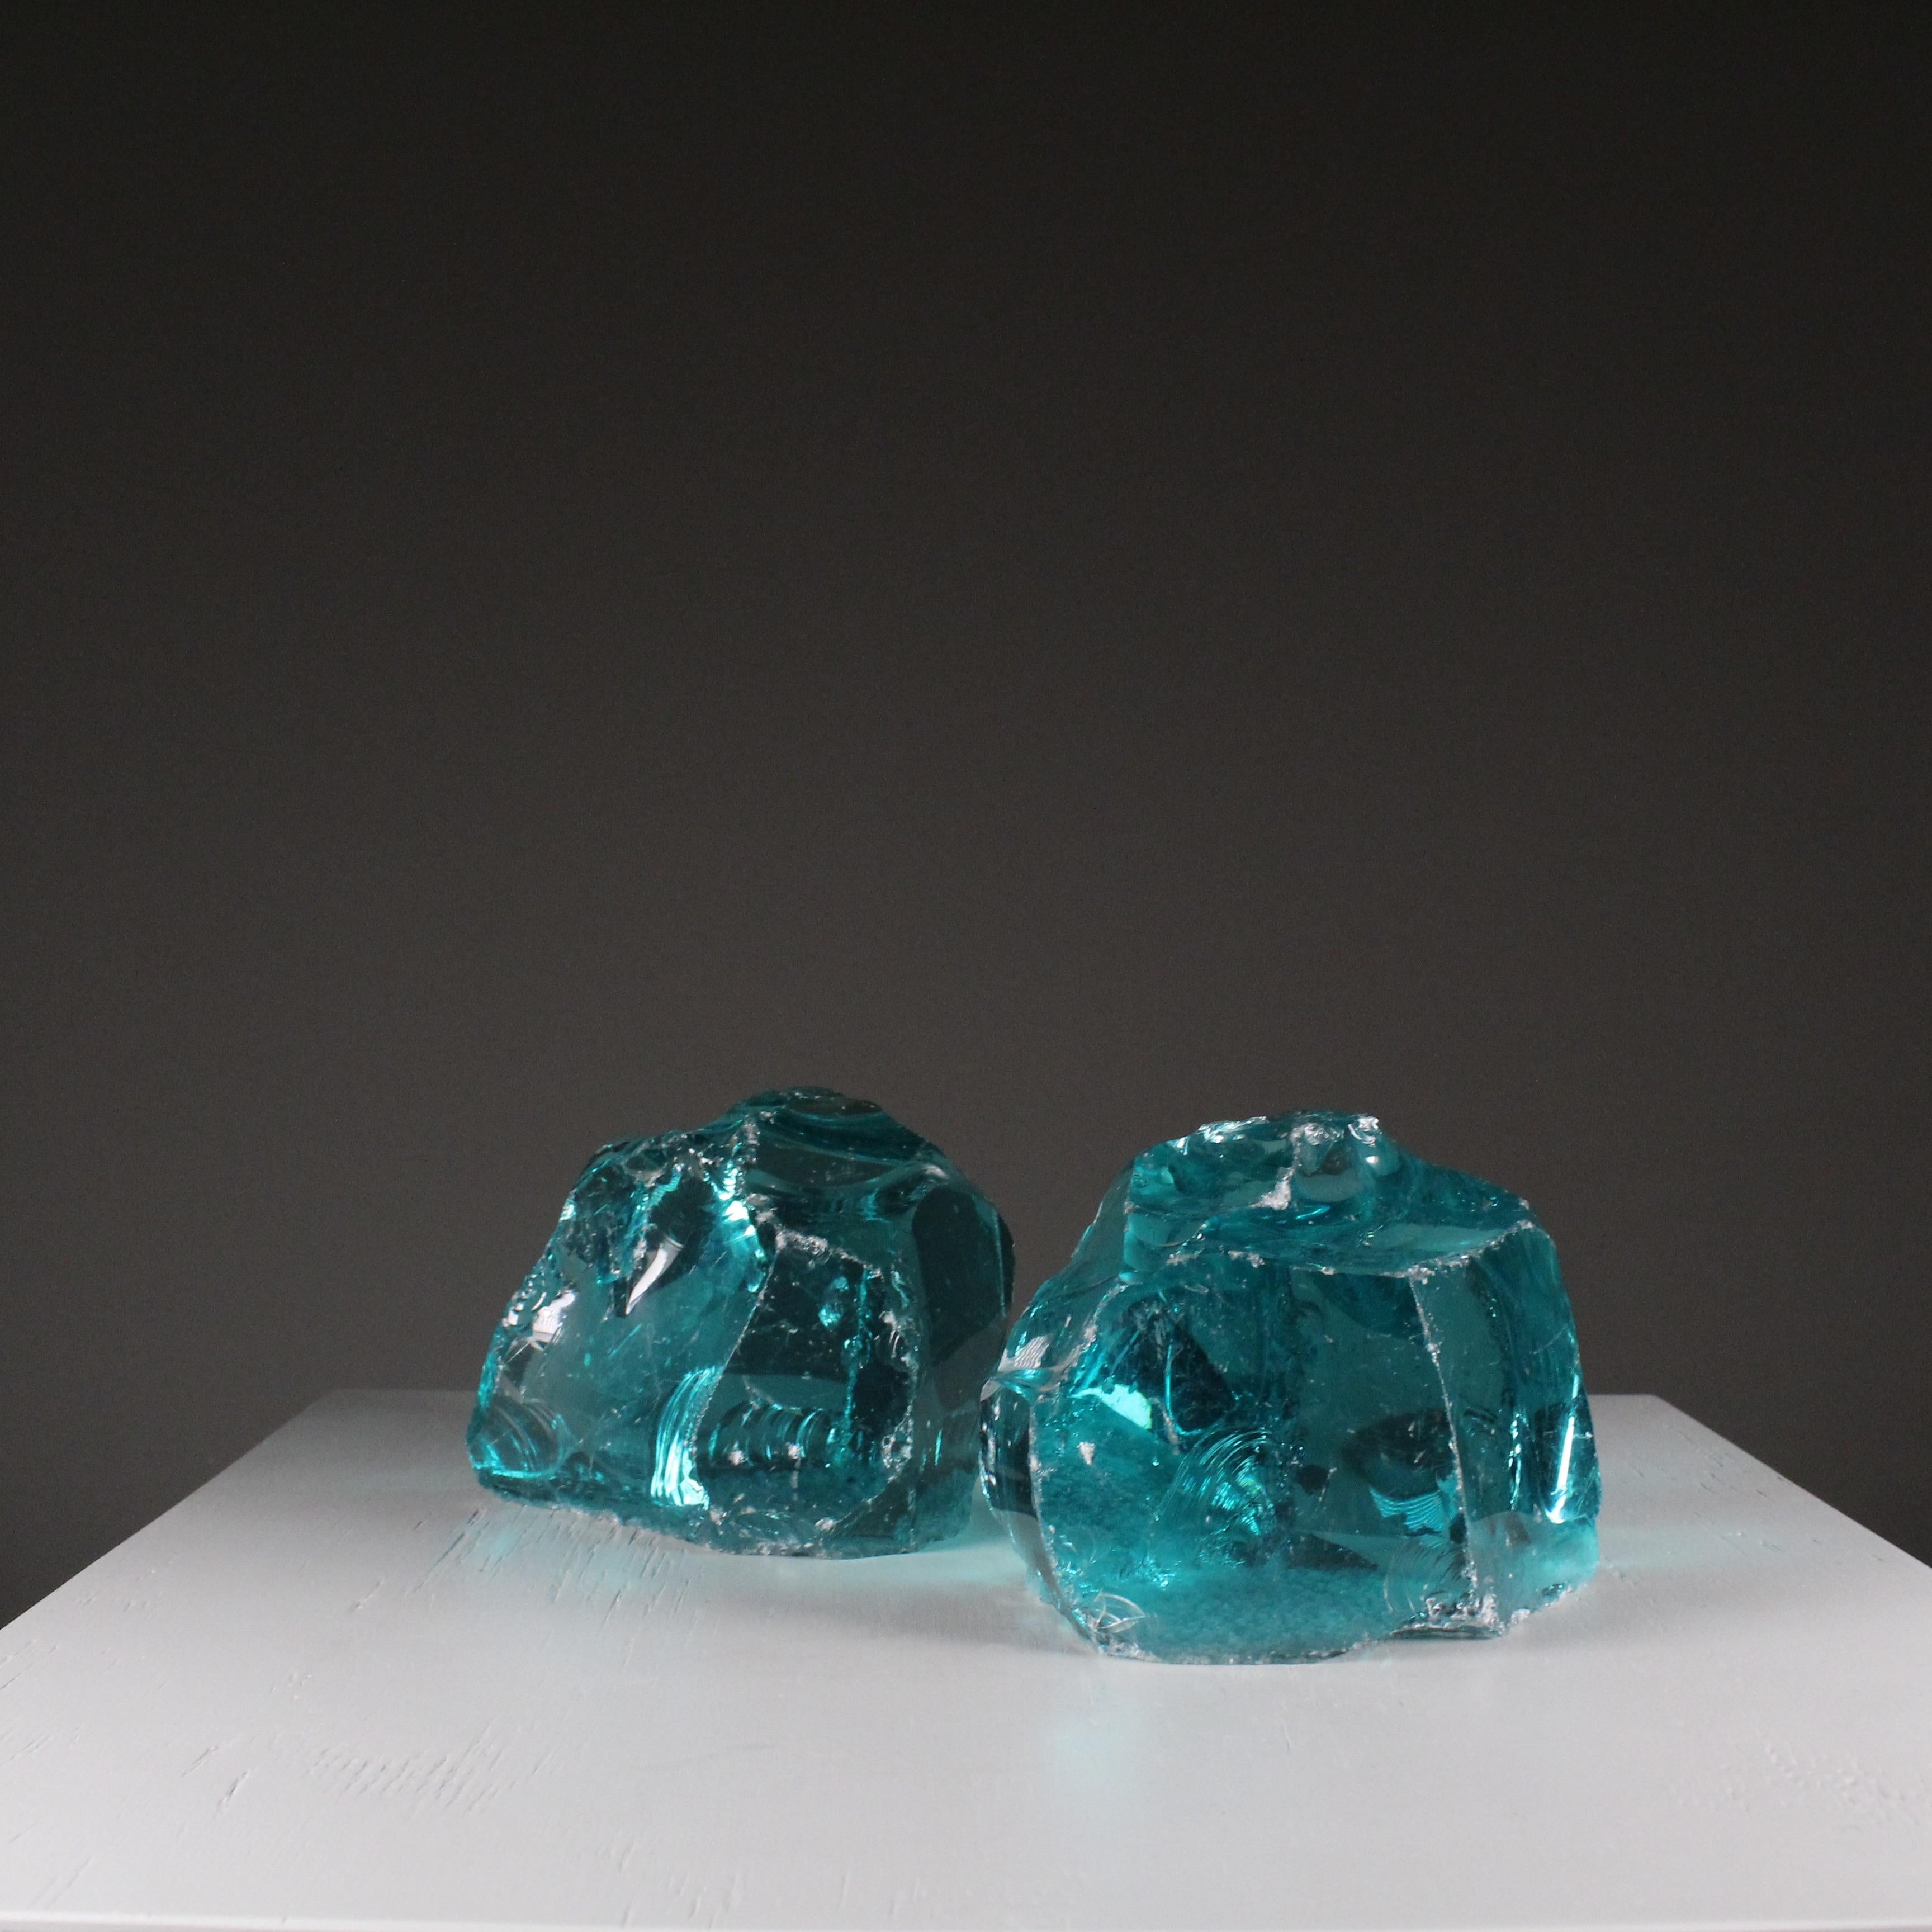 Pair of Fontana Arte glass sculptures. They are different in size and form. 

SIZE 1: 20x12x15
SIZE 2: 17x16x15